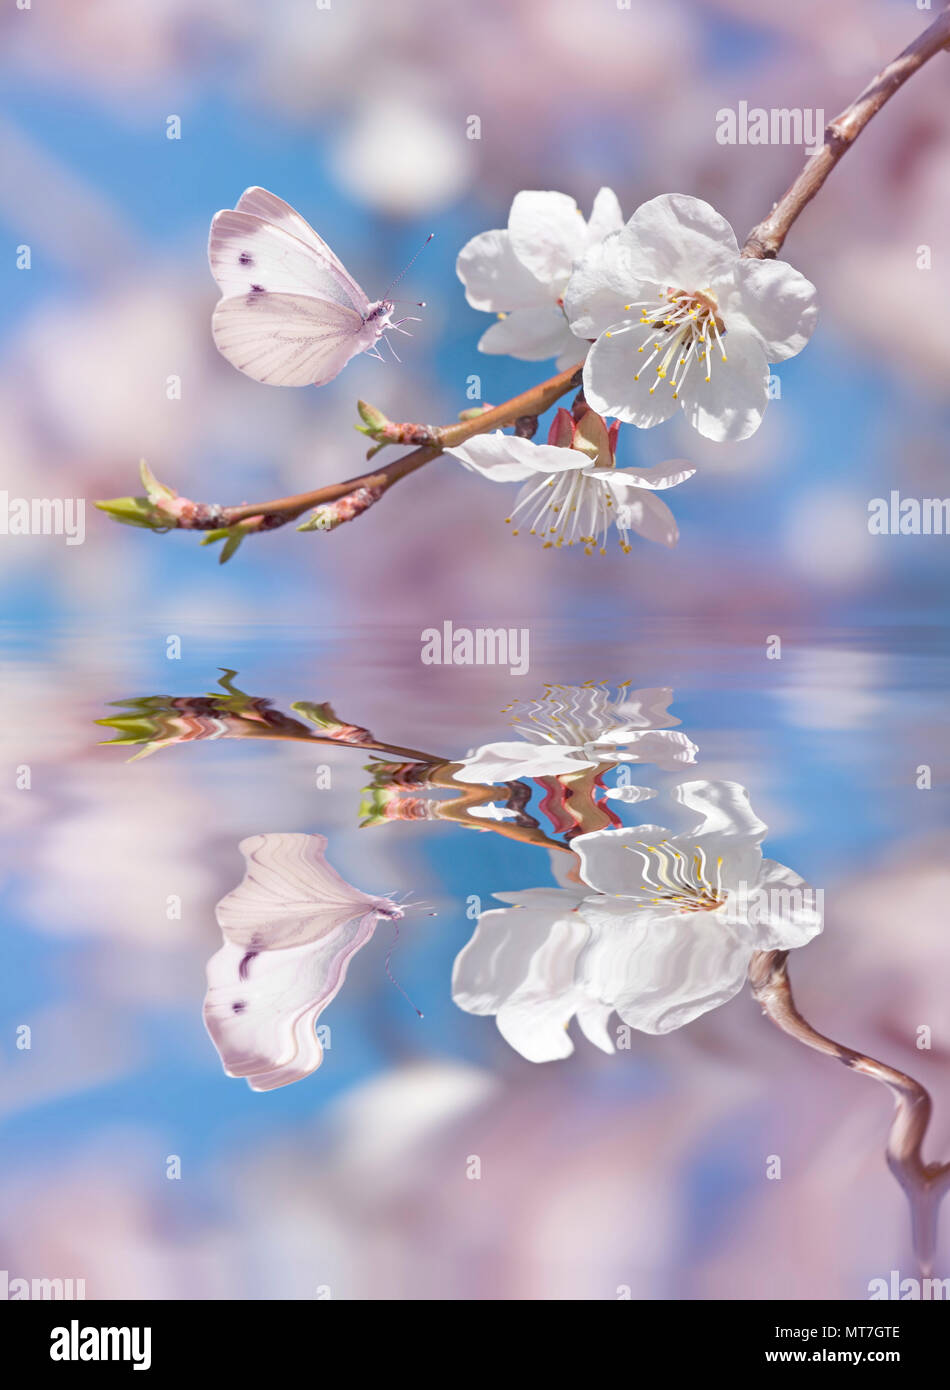 Beautiful white butterfly and branch of blossoming cherry in spring on blue and pink background with reflection in a water surface close-up. Amazing e Stock Photo